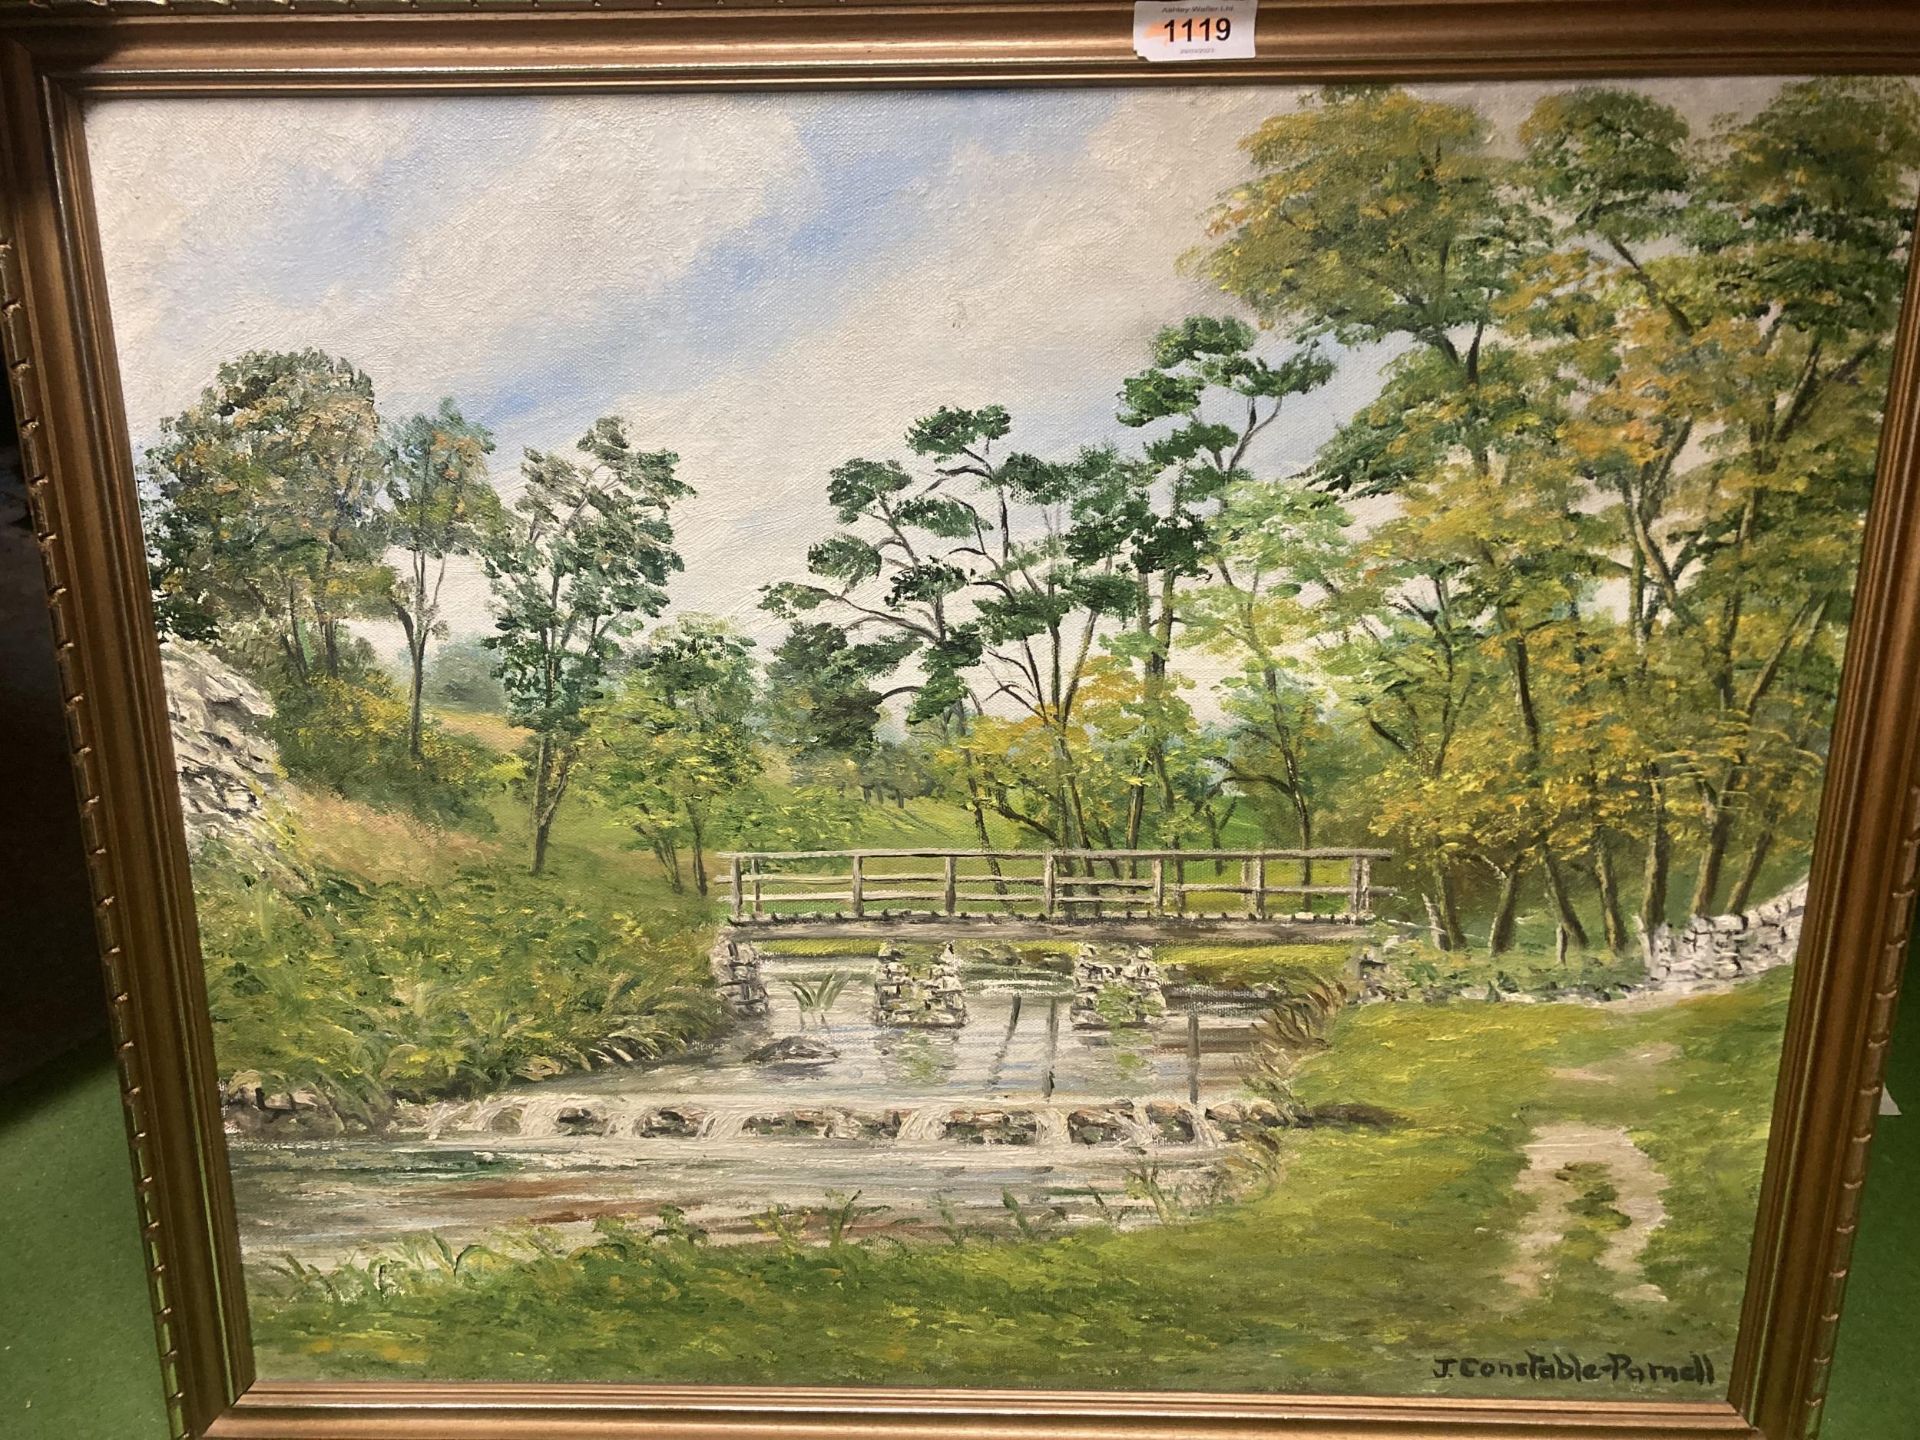 TWO LARGE OIL ON CANVAS PAINTINGS SIGNED J. CONSTABLE-PARNELL 67CM X 57CM - Image 4 of 5